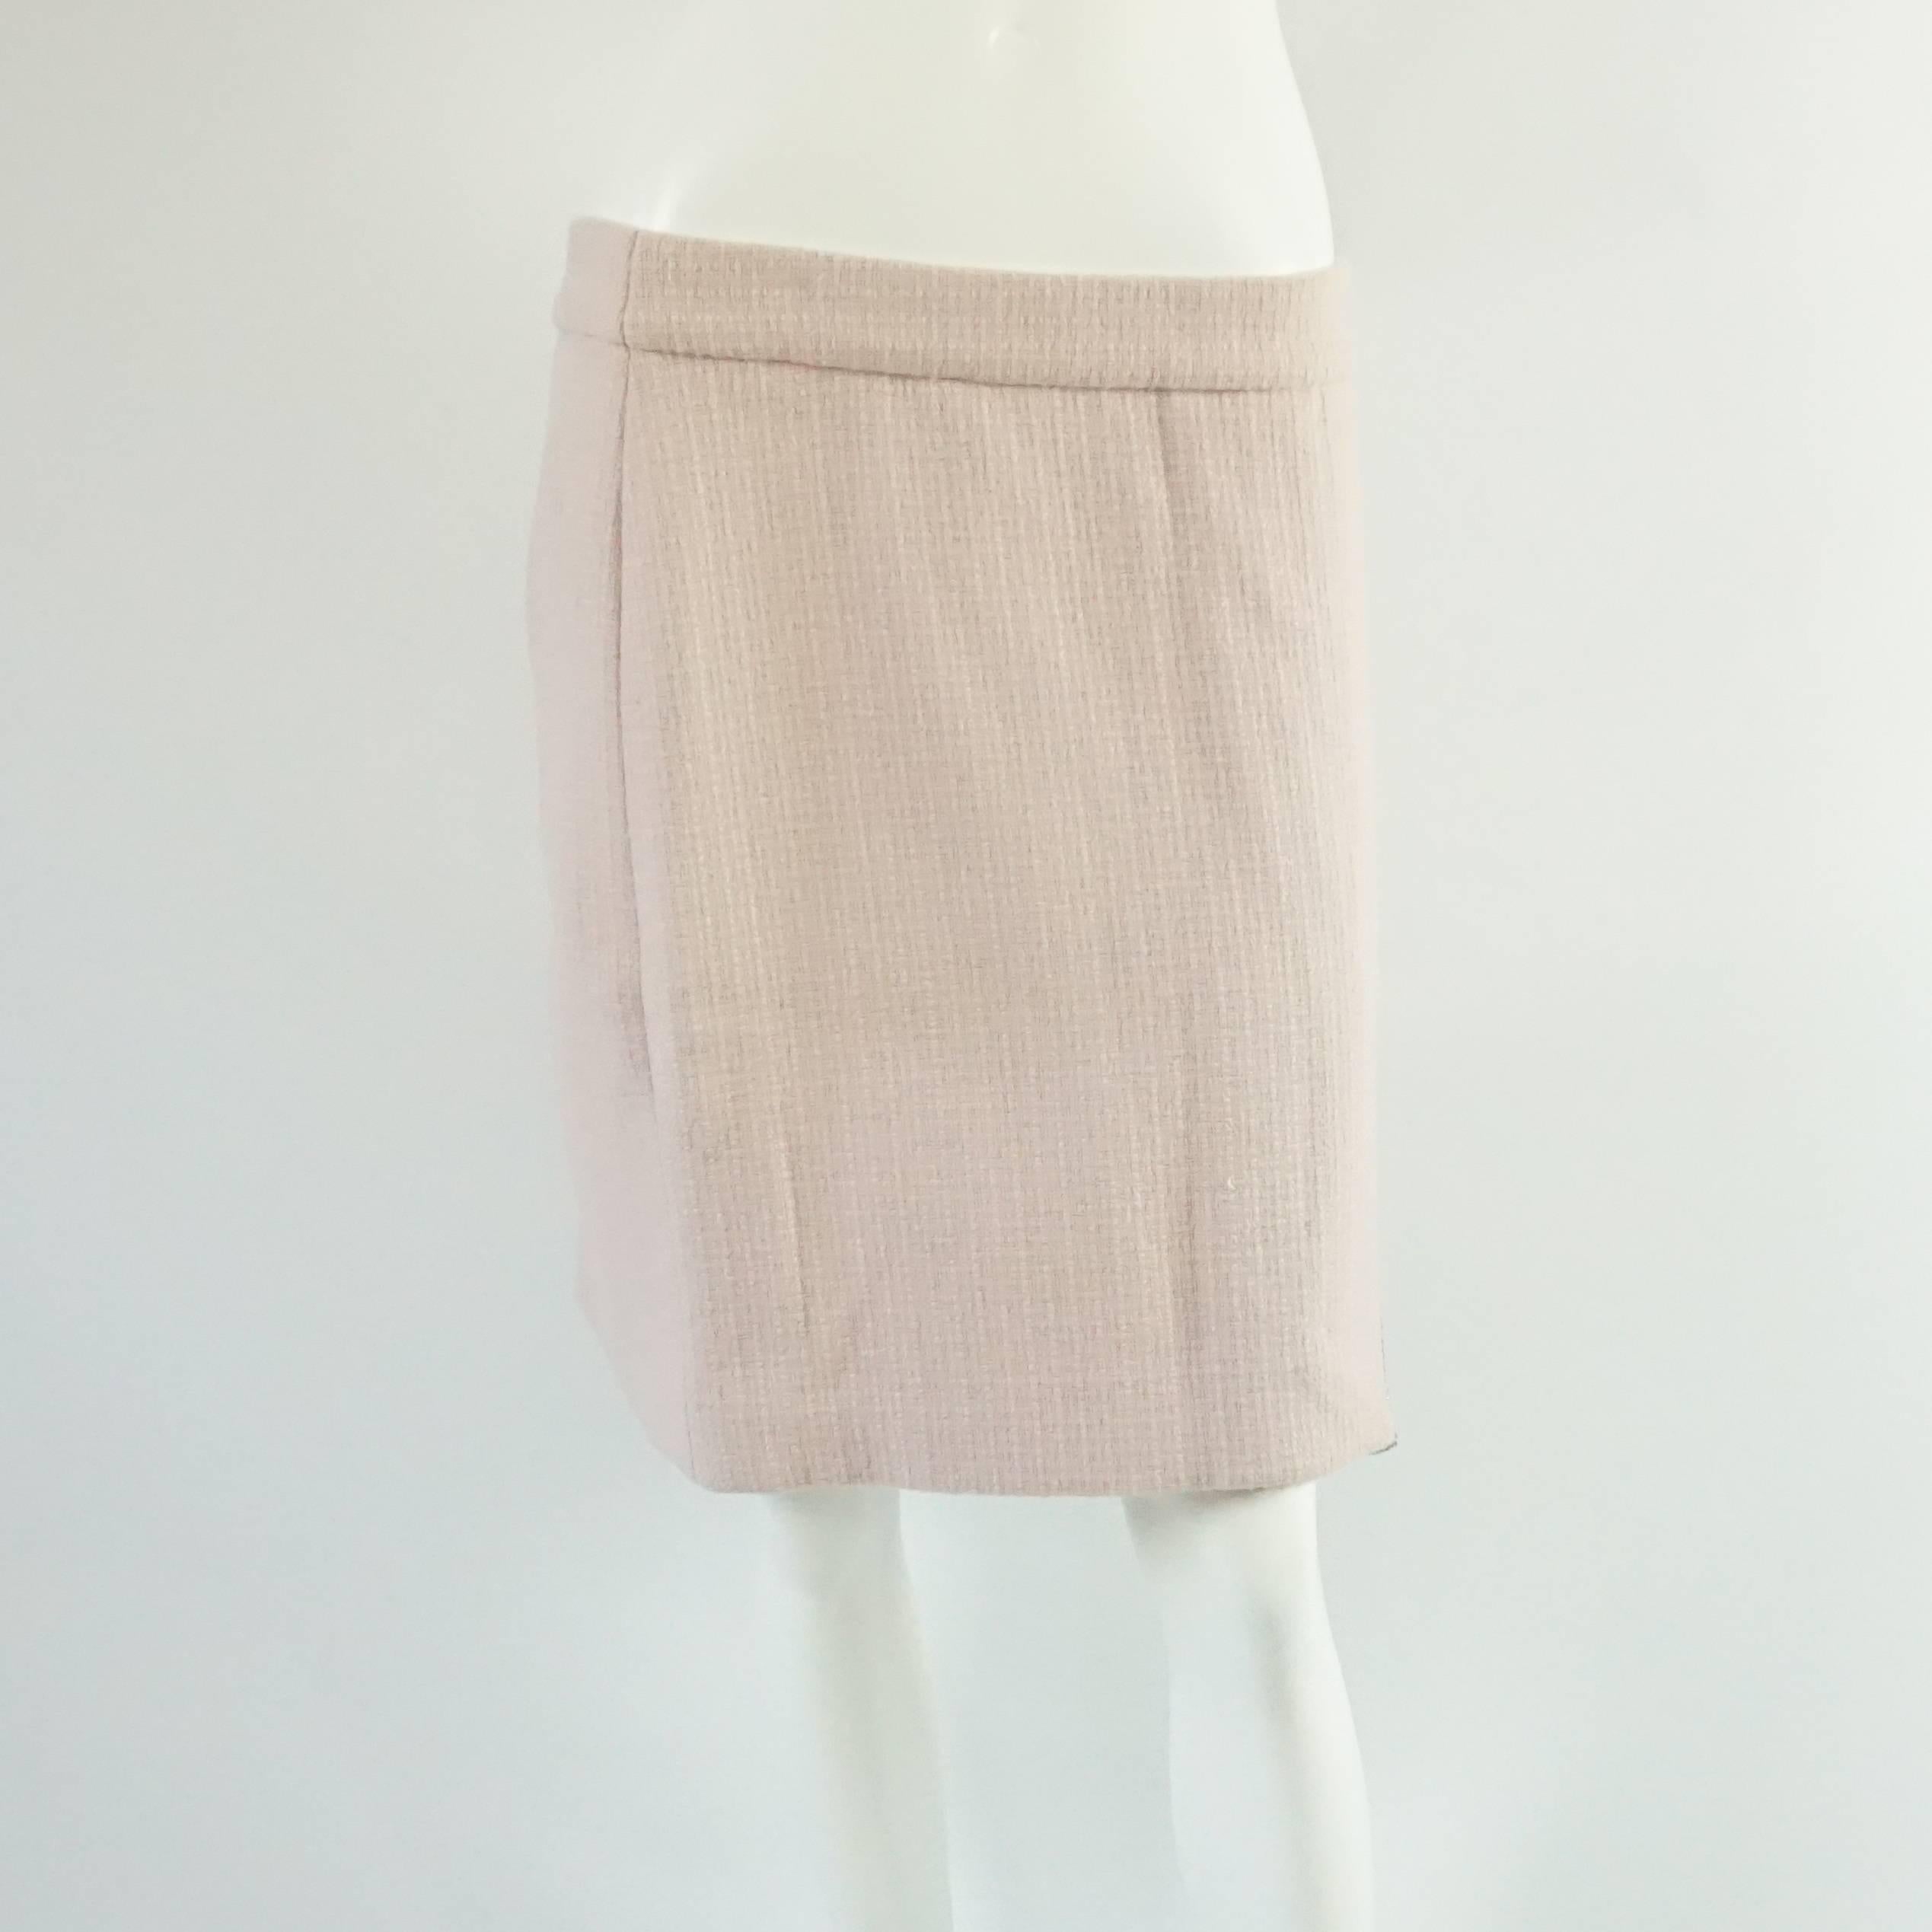 Dolce & Gabbana Pink Tweed Skirt Suit with a Rhinestone Logo Trim - Size 44 In Excellent Condition For Sale In West Palm Beach, FL